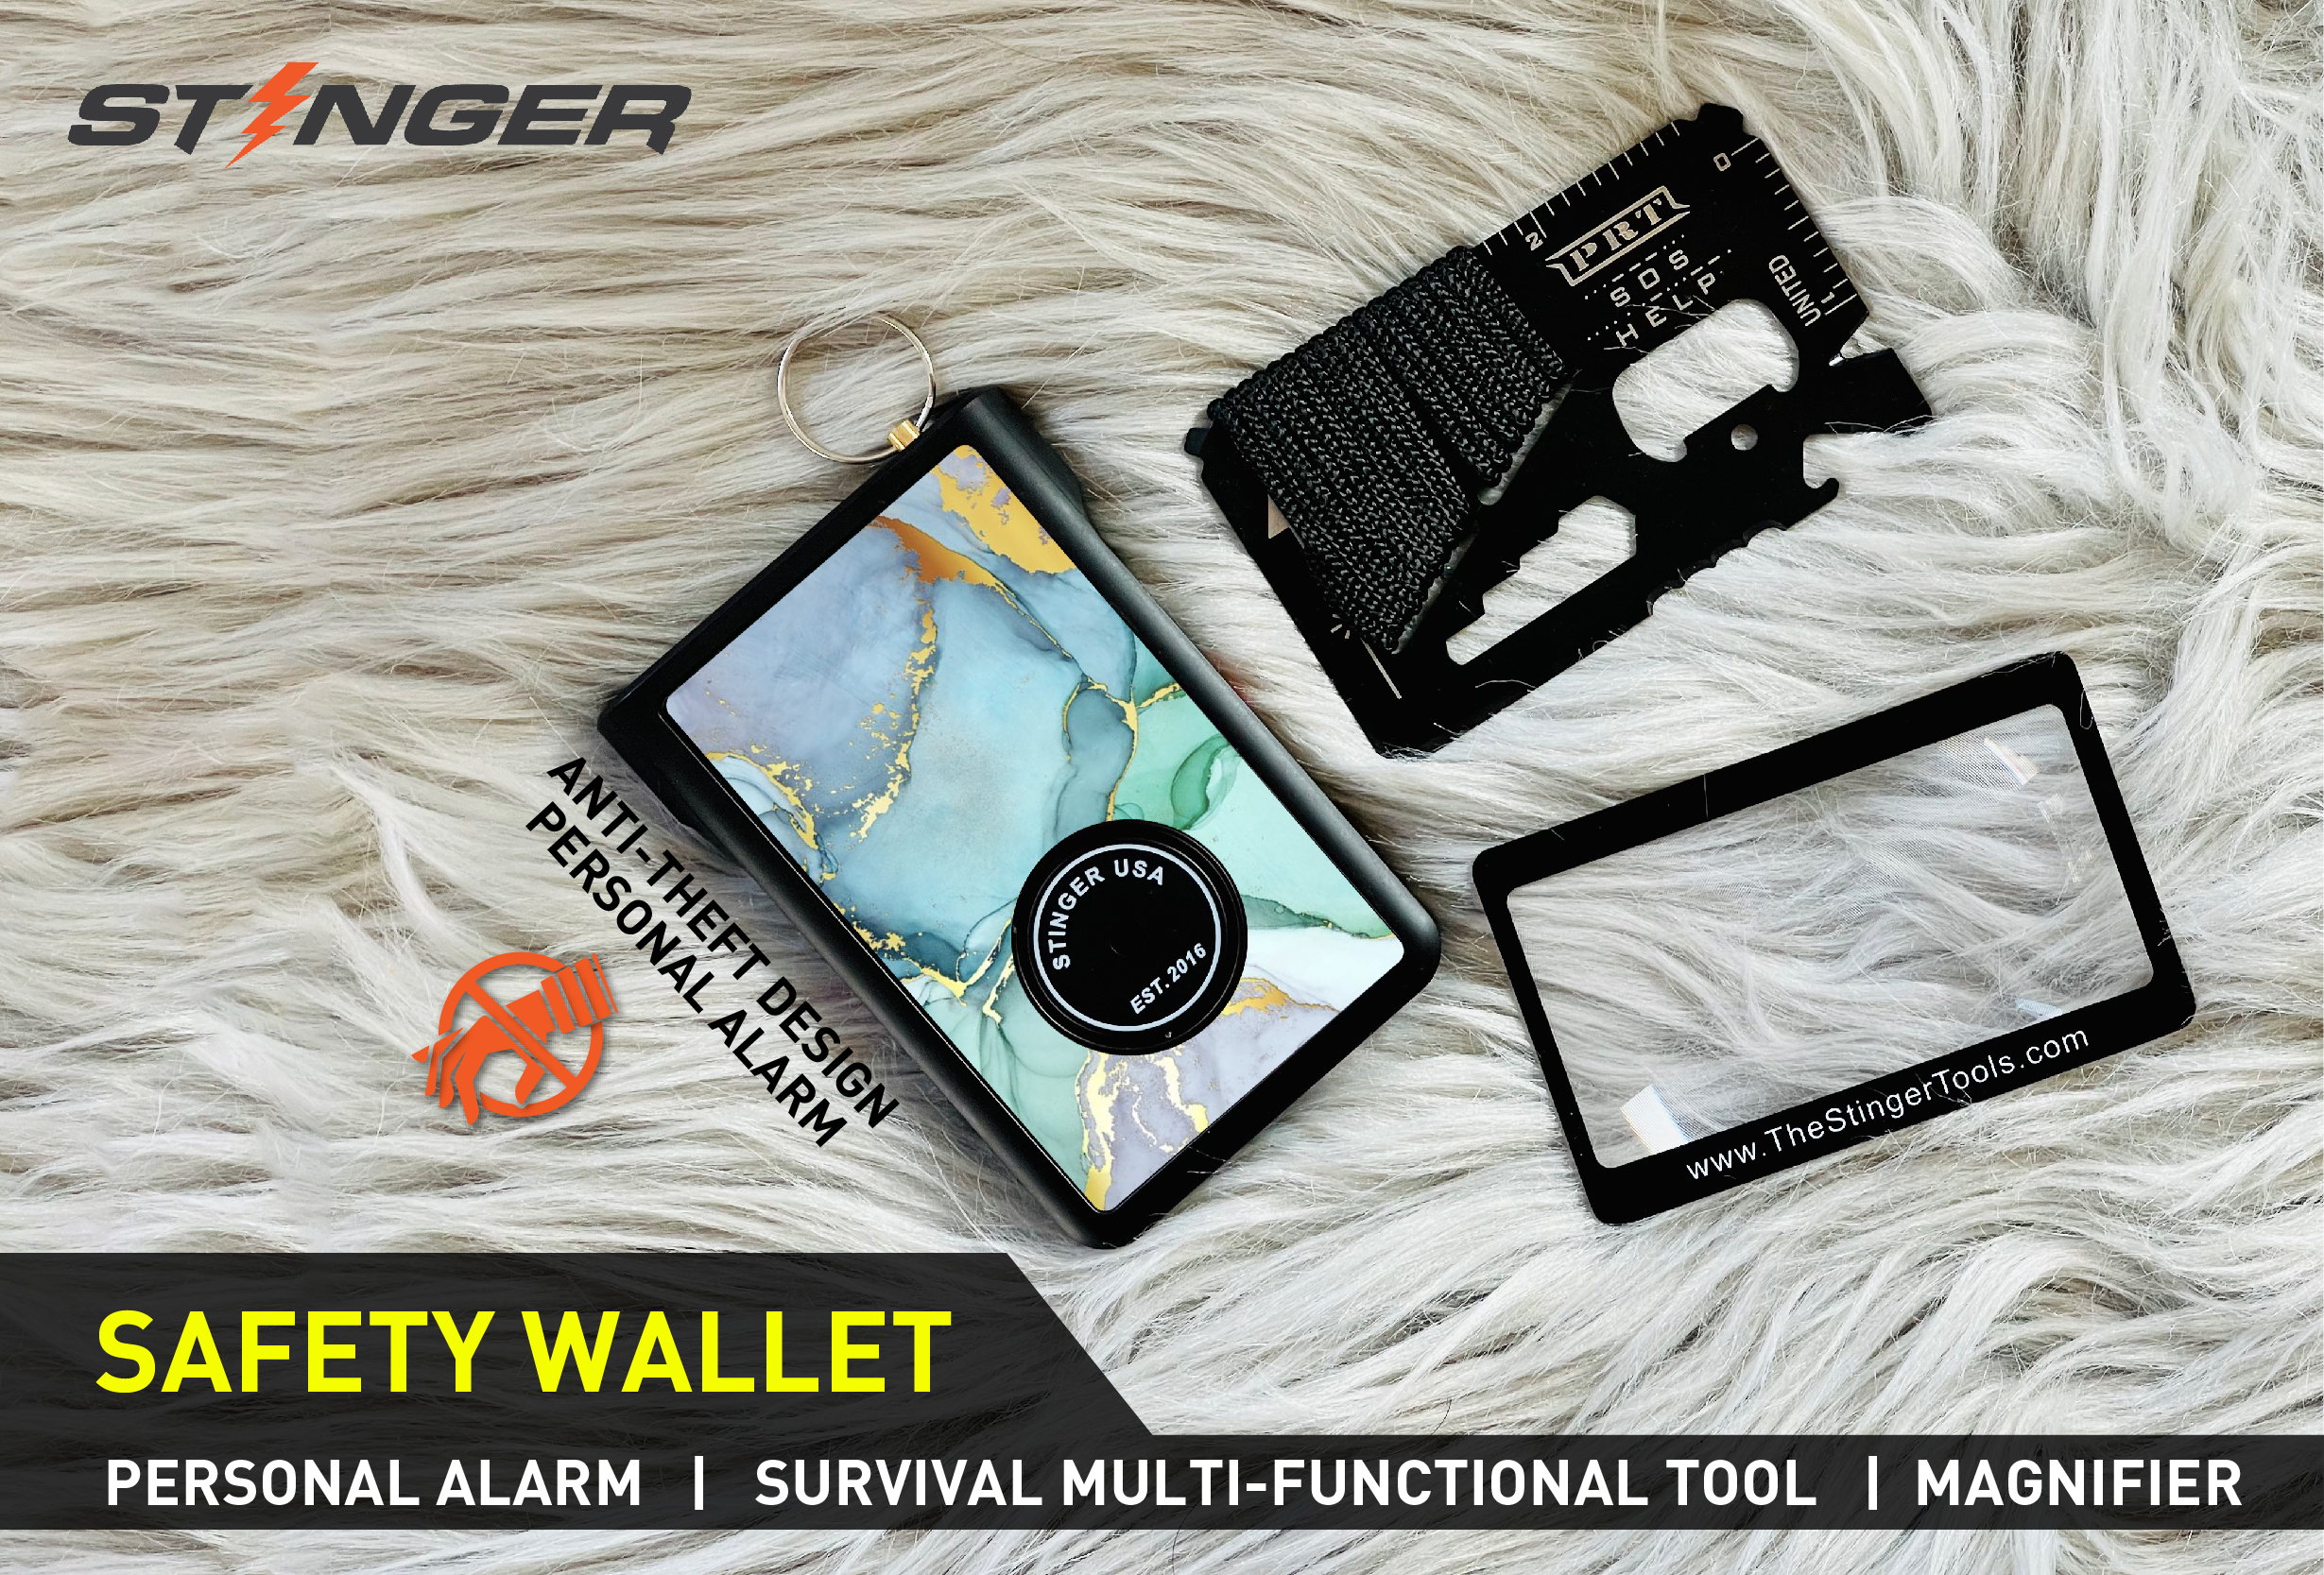 Stinger Safety Polymer Wallet with Personal Alarm Emergency Tool, Multi-functional Tool, and Magnifier, Original Design in USA